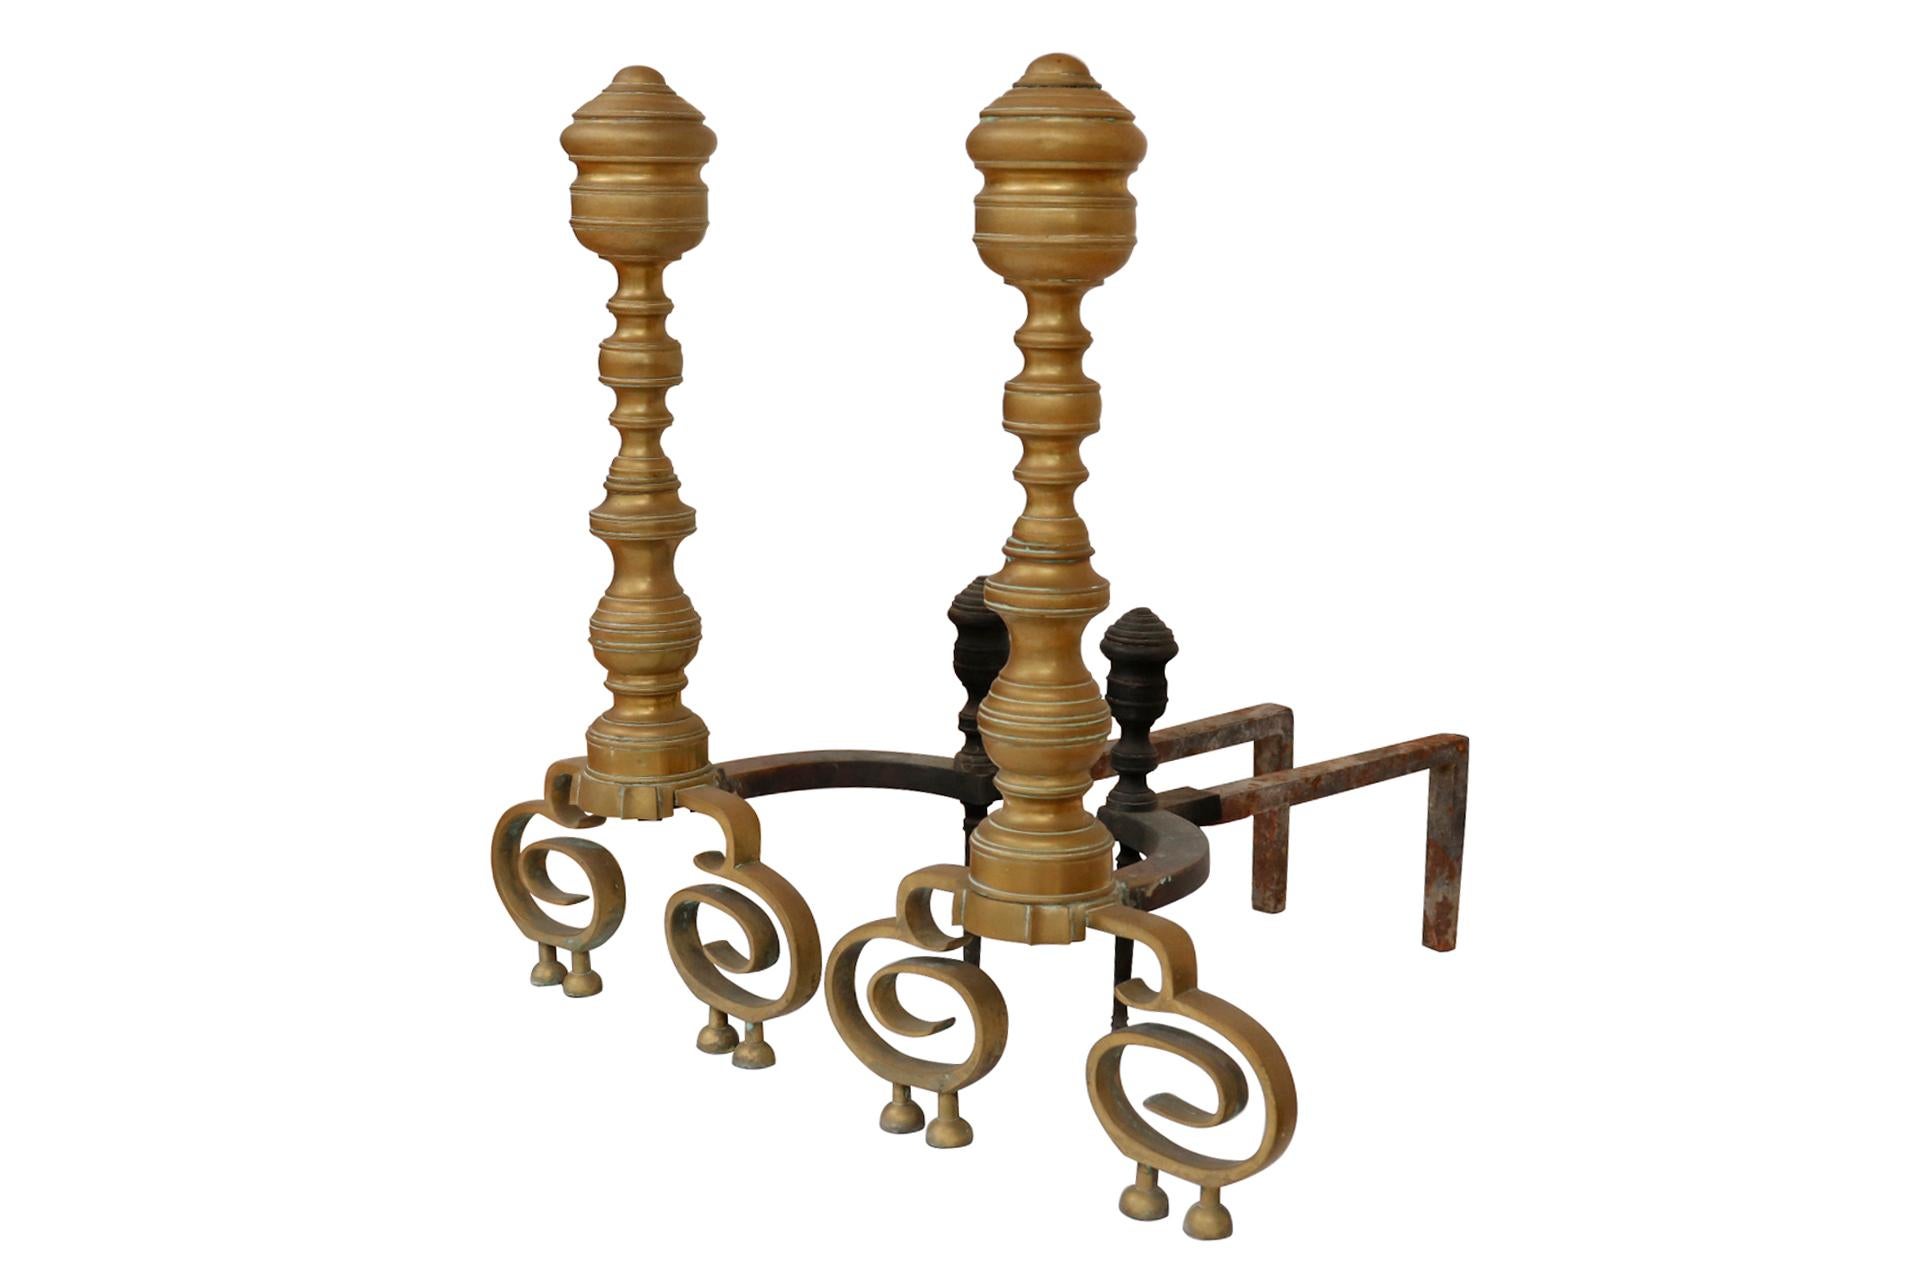 Antique American Empire Andirons, a Pair In Good Condition For Sale In Bradenton, FL